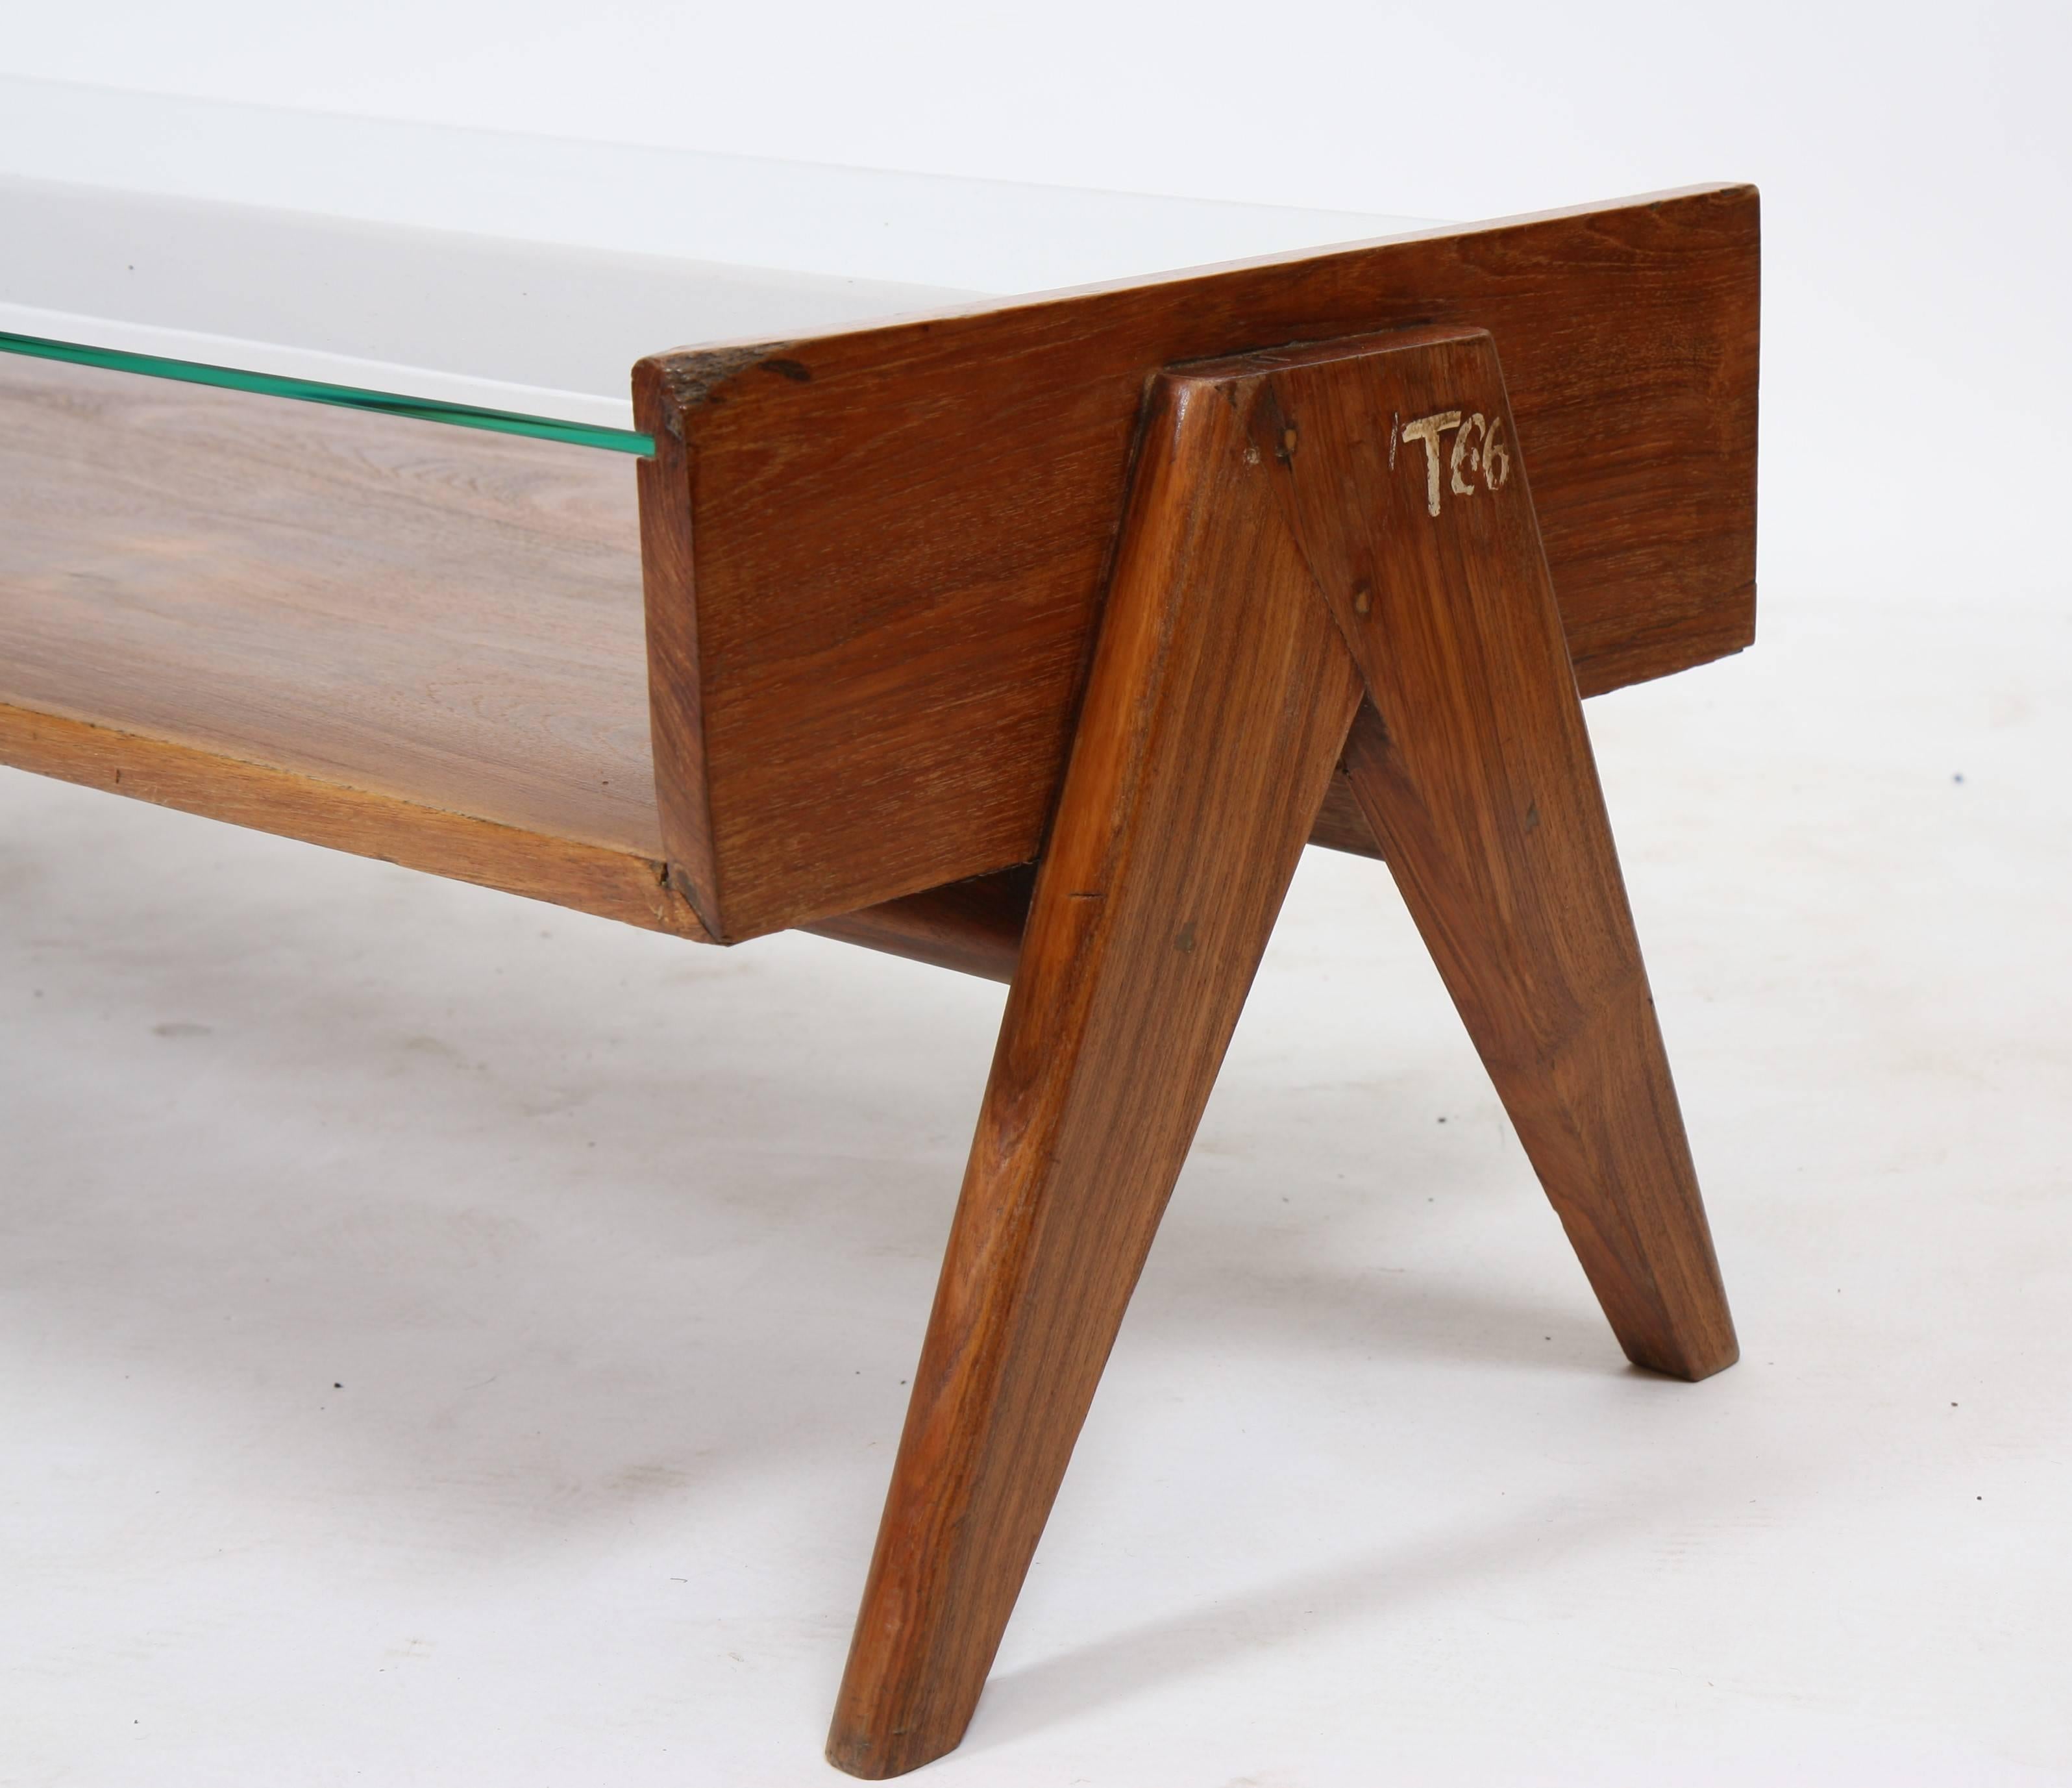 Table, circa 1960.
Two feet type 'V' with open locker, glass top.
Massive teak.
Provenance: Assembly, administrative buildings, private houses.
Chandigarh, India.

Bibliography:
E. Touchaleaume & G. Moreau
‘Le Corbusier Pierre Jeanneret